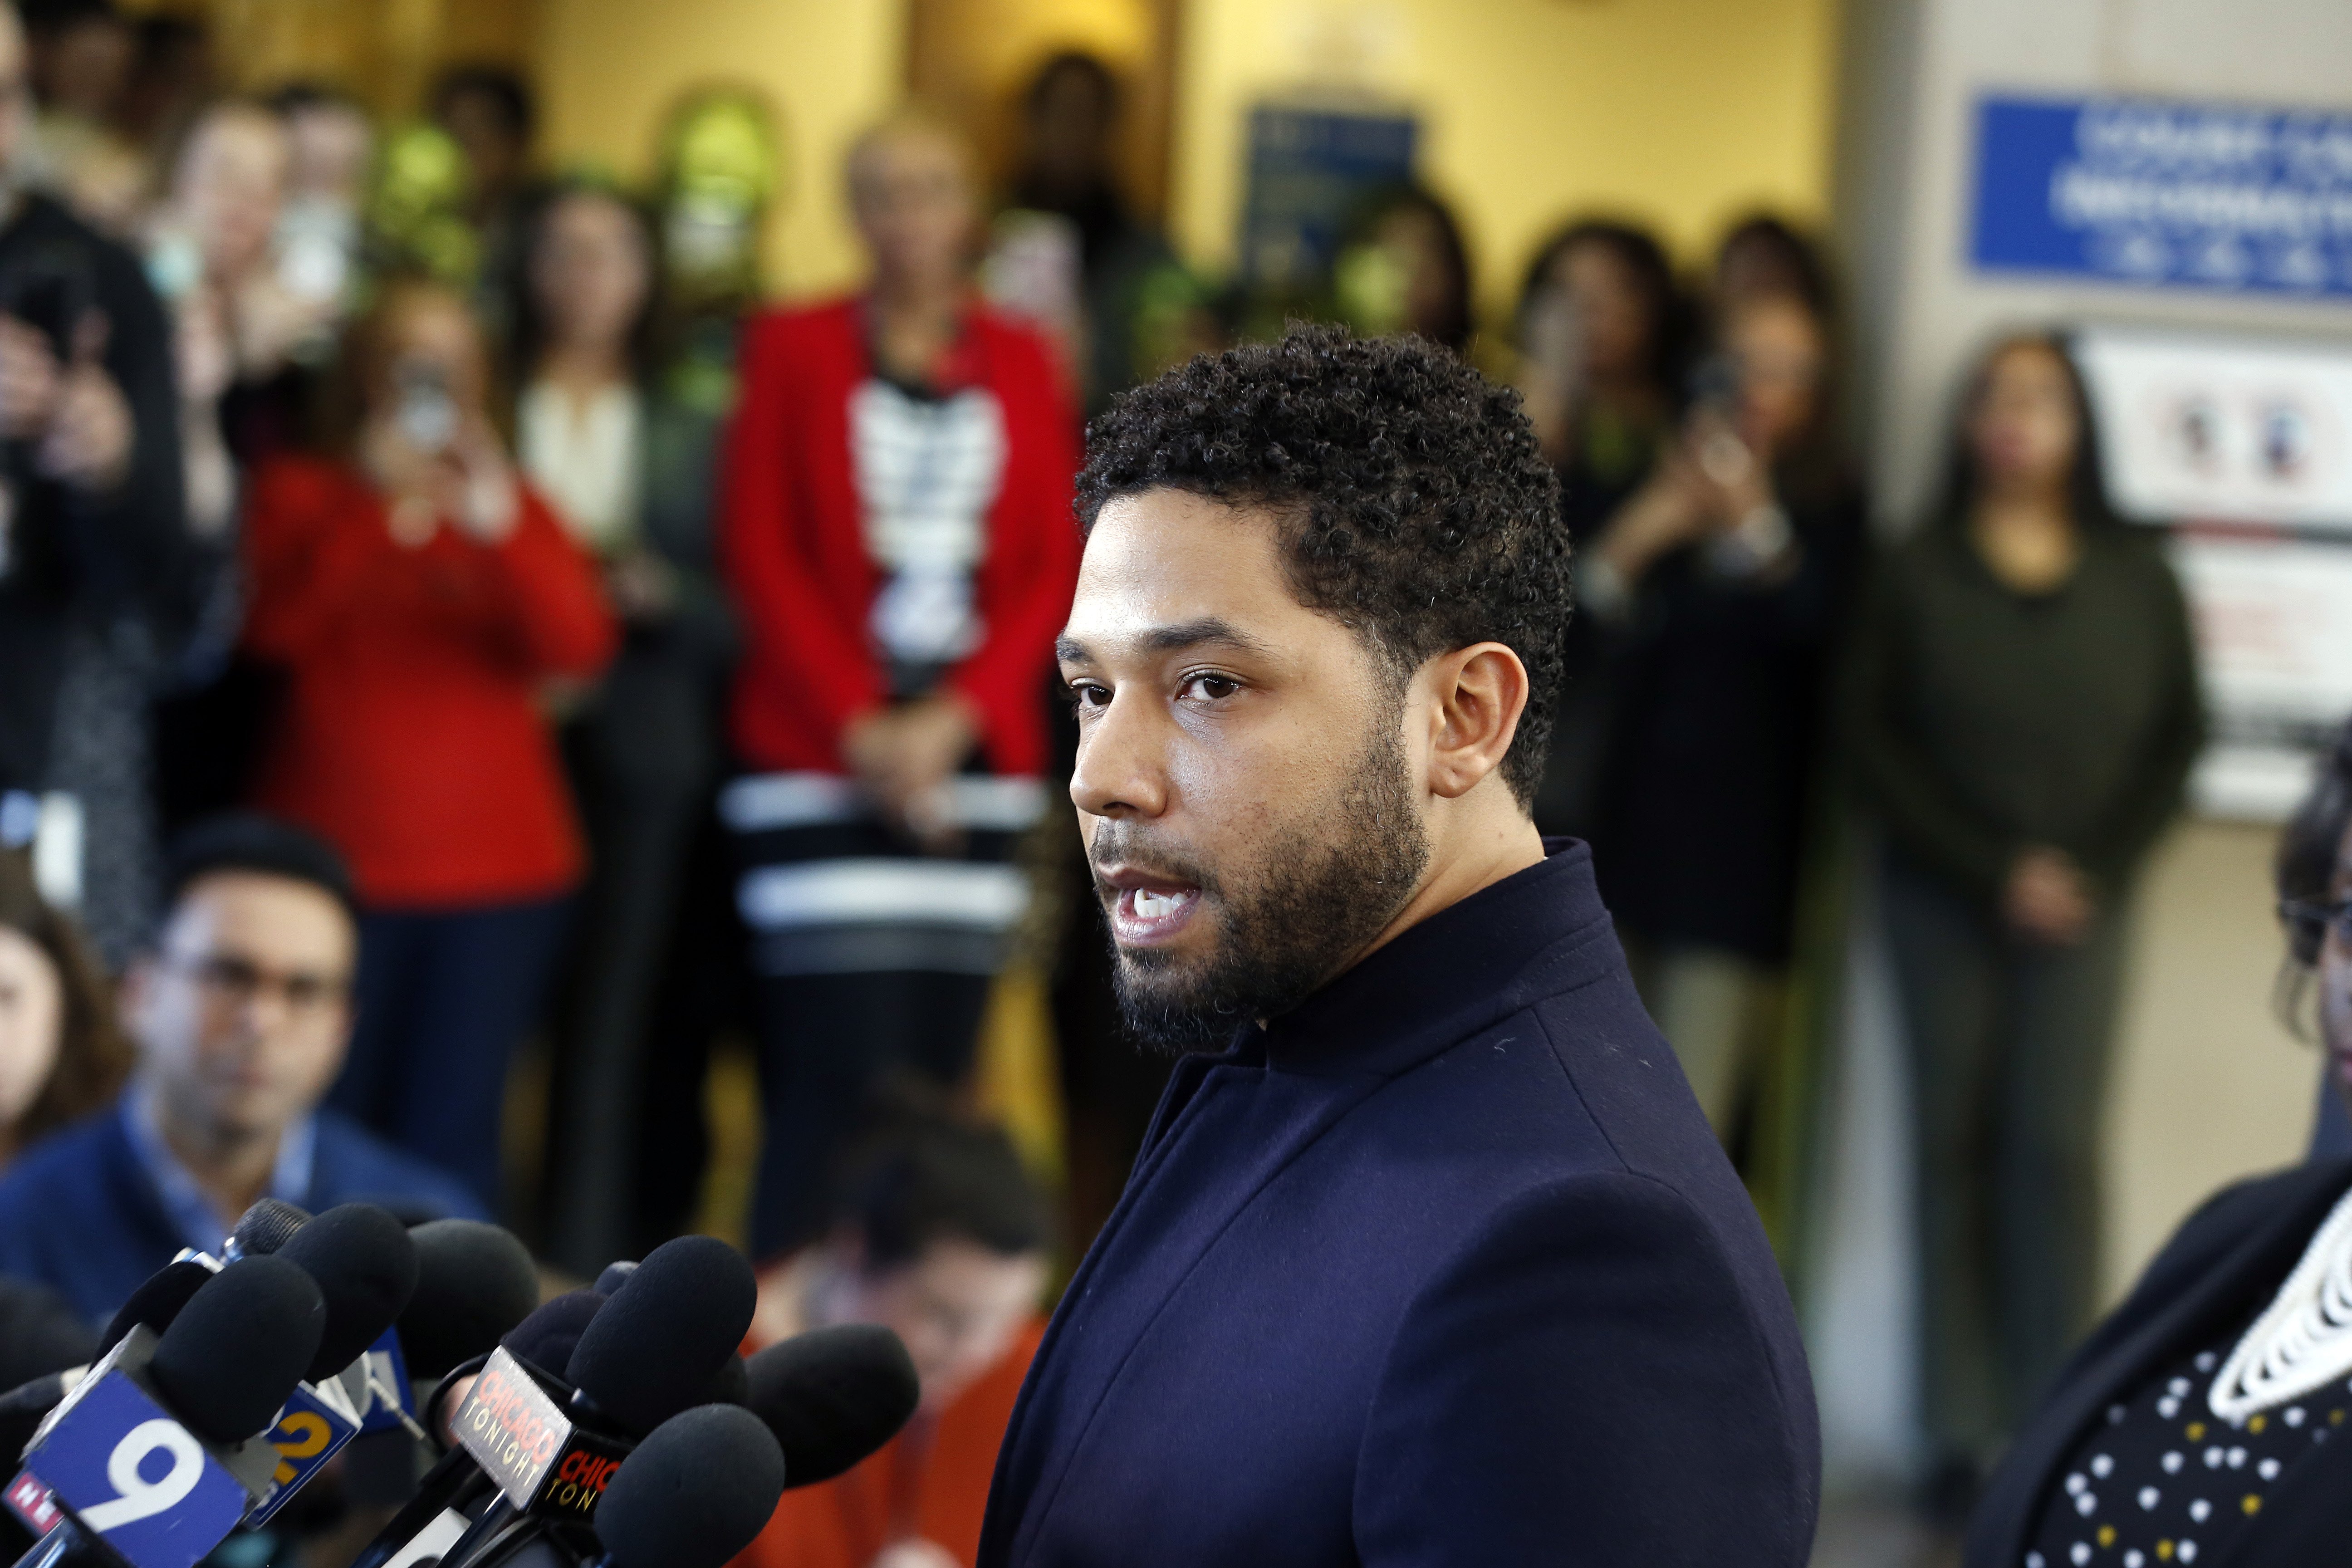 Jussie Smollett speaking to the media after all charges against him were dropped in March 2019. | Photo: Getty Images